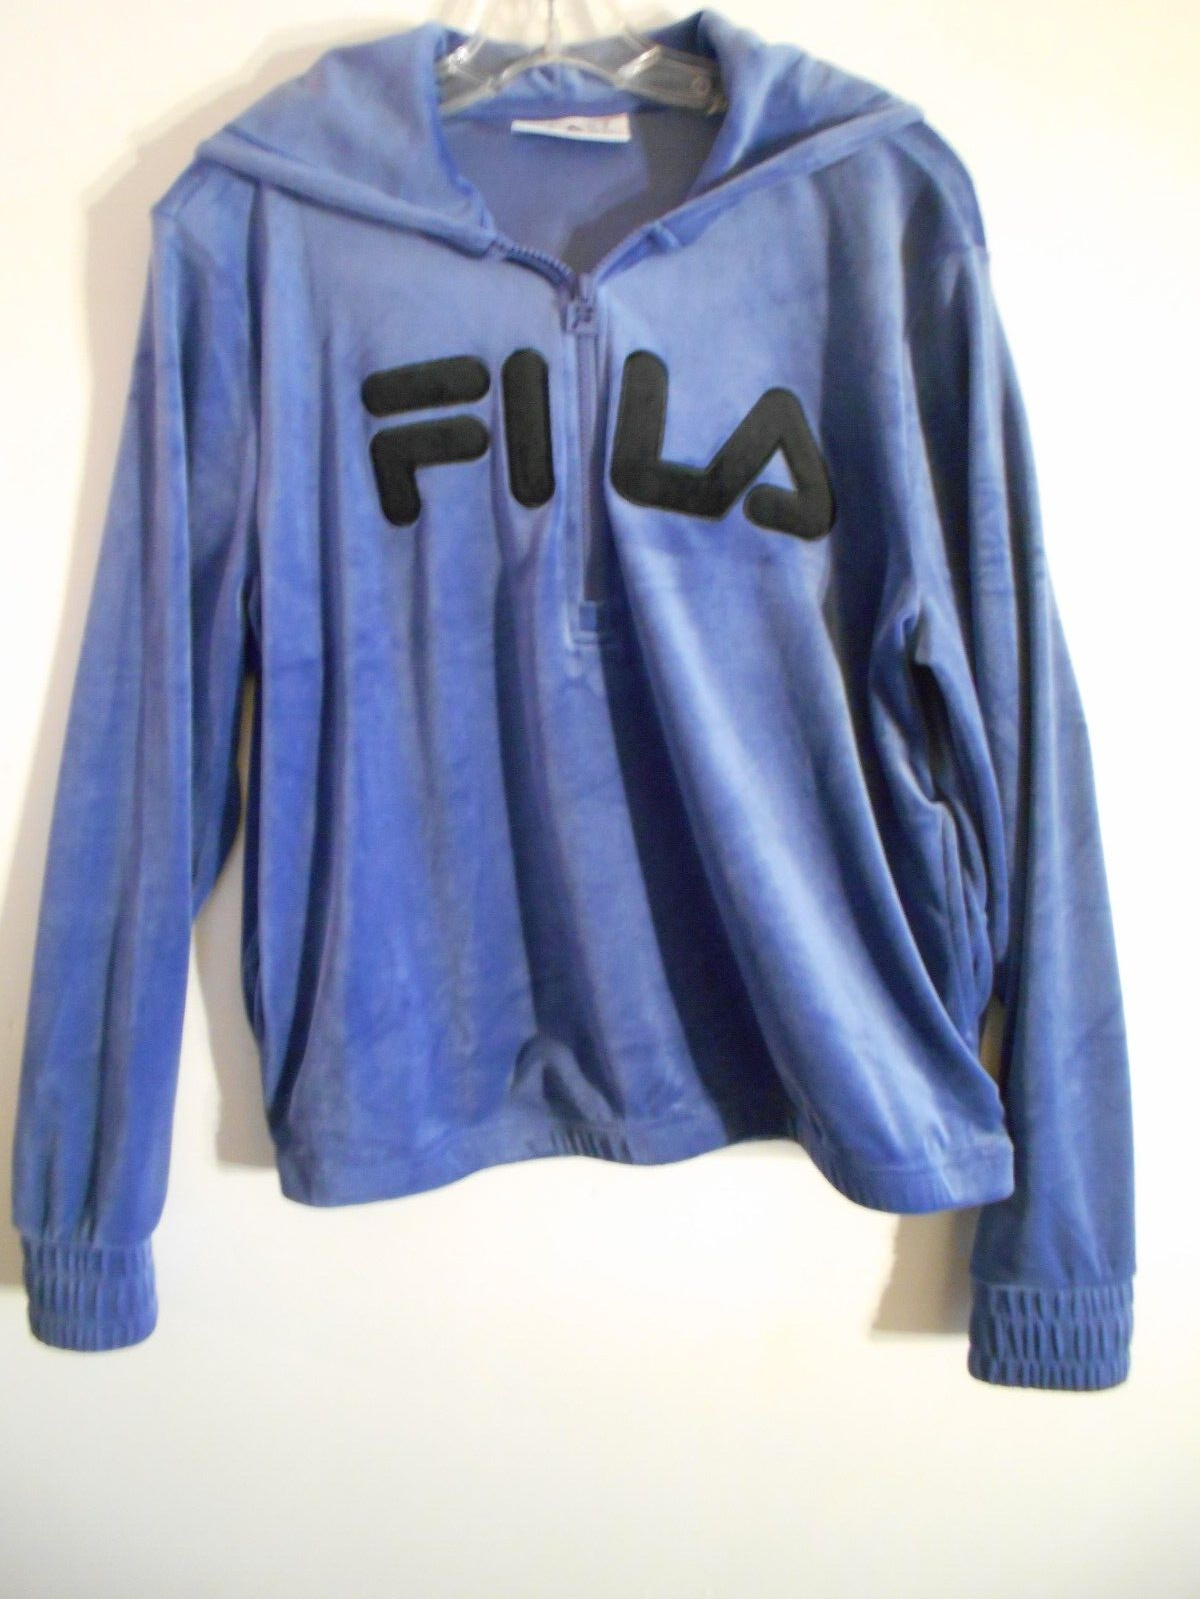 Primary image for Fila Womens Periwinkle Blue Velour Medium Hooded Athleisure Jacket Top